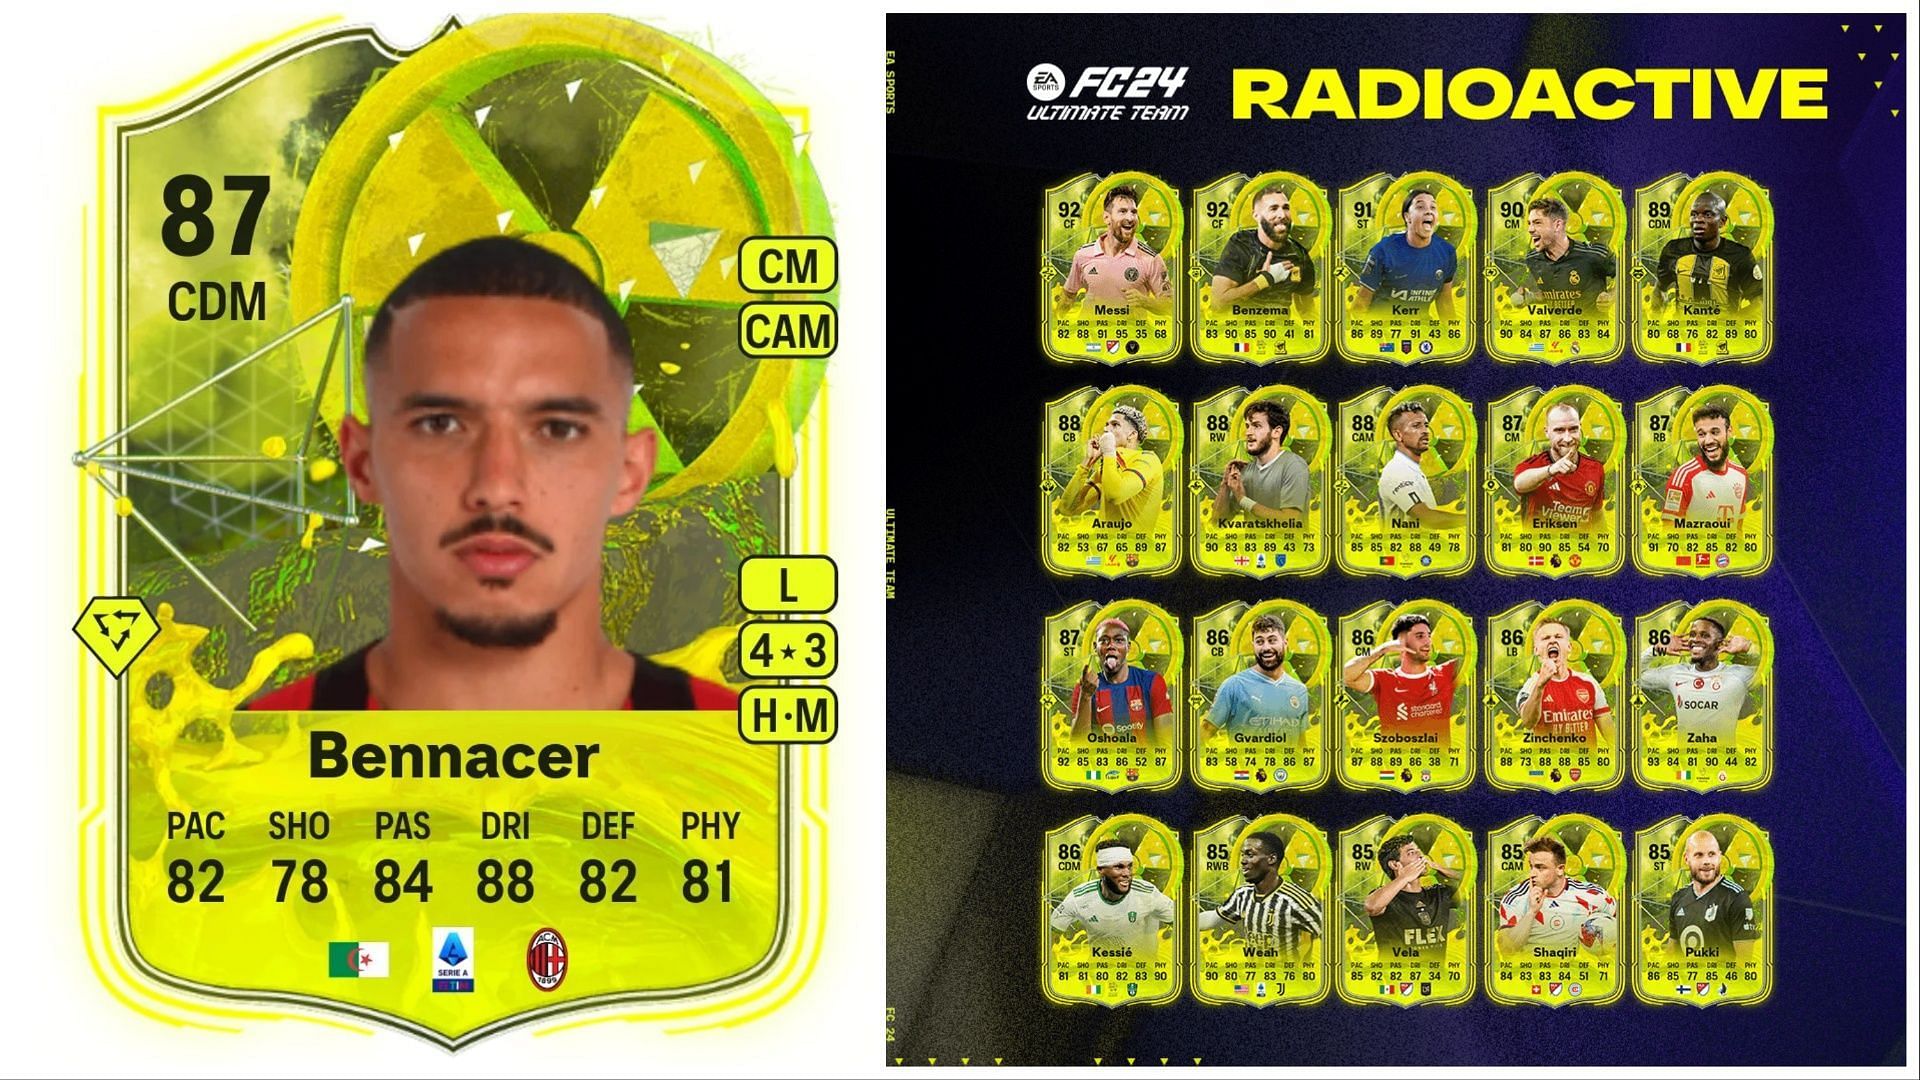 Radiaoctive Ismael Bennacer is now available (Images via EA Sports)